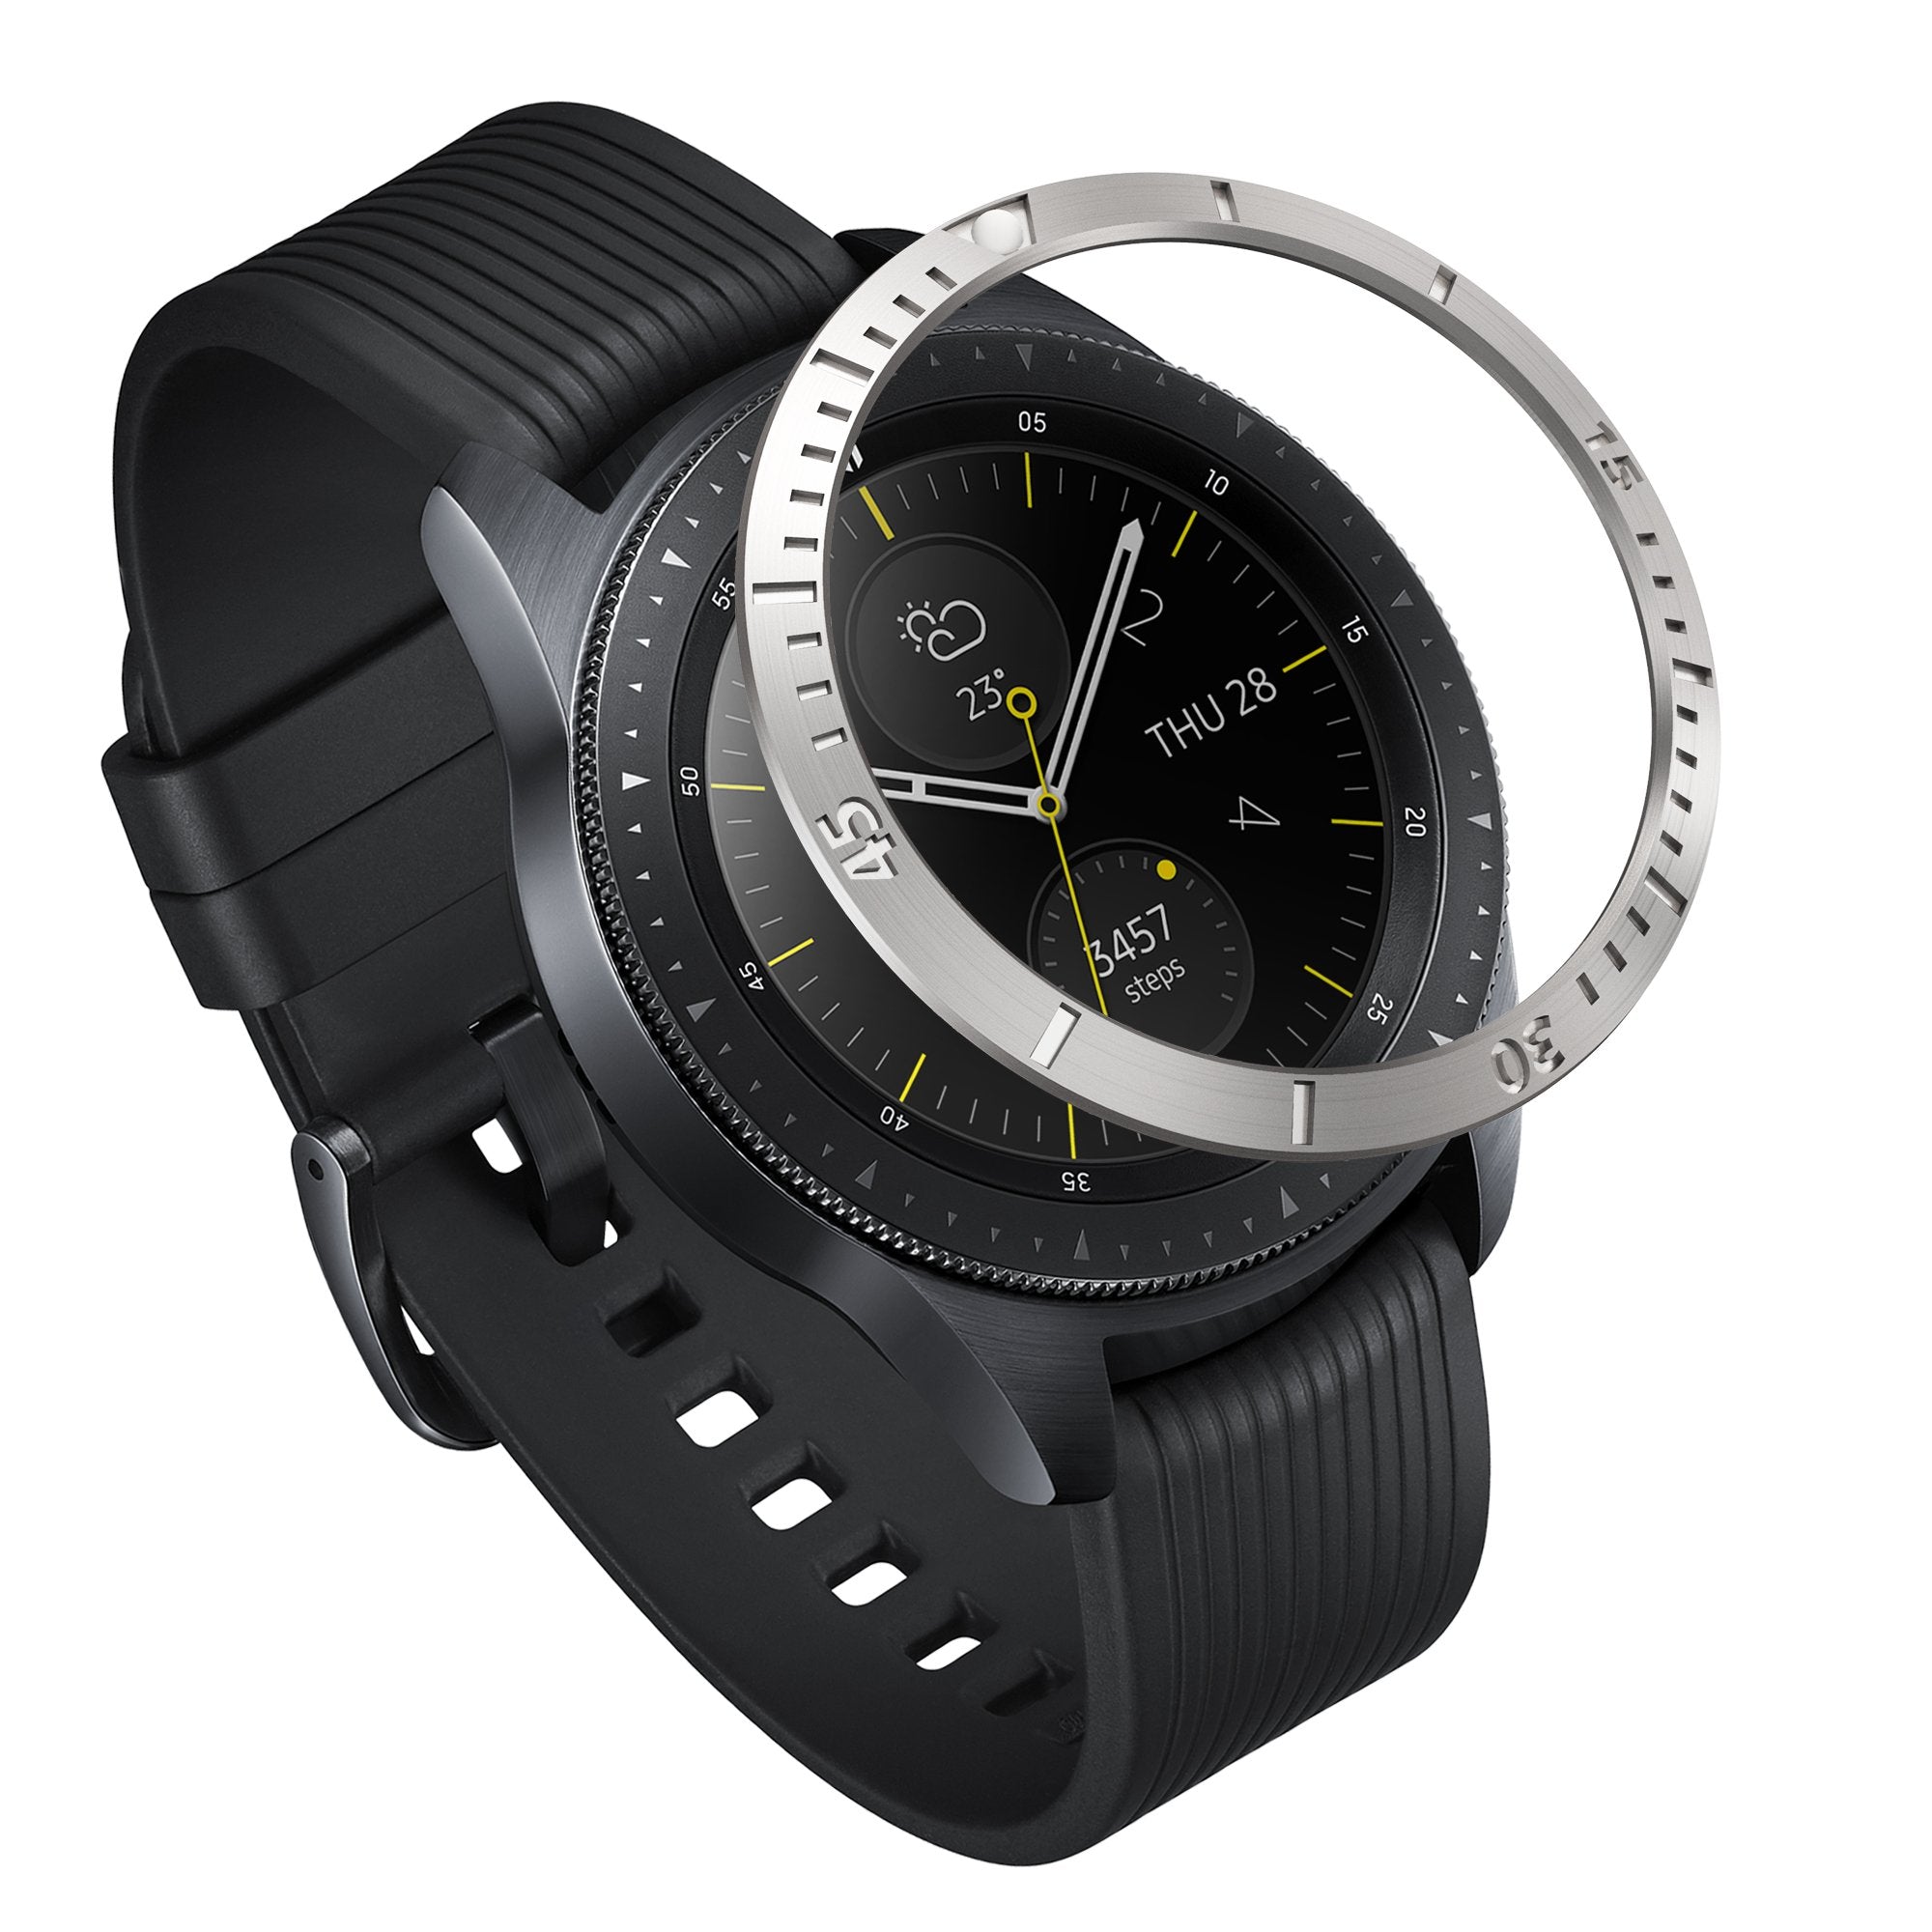 Ringke Bezel Styling stainless steel for samsung galaxy watch 42mm